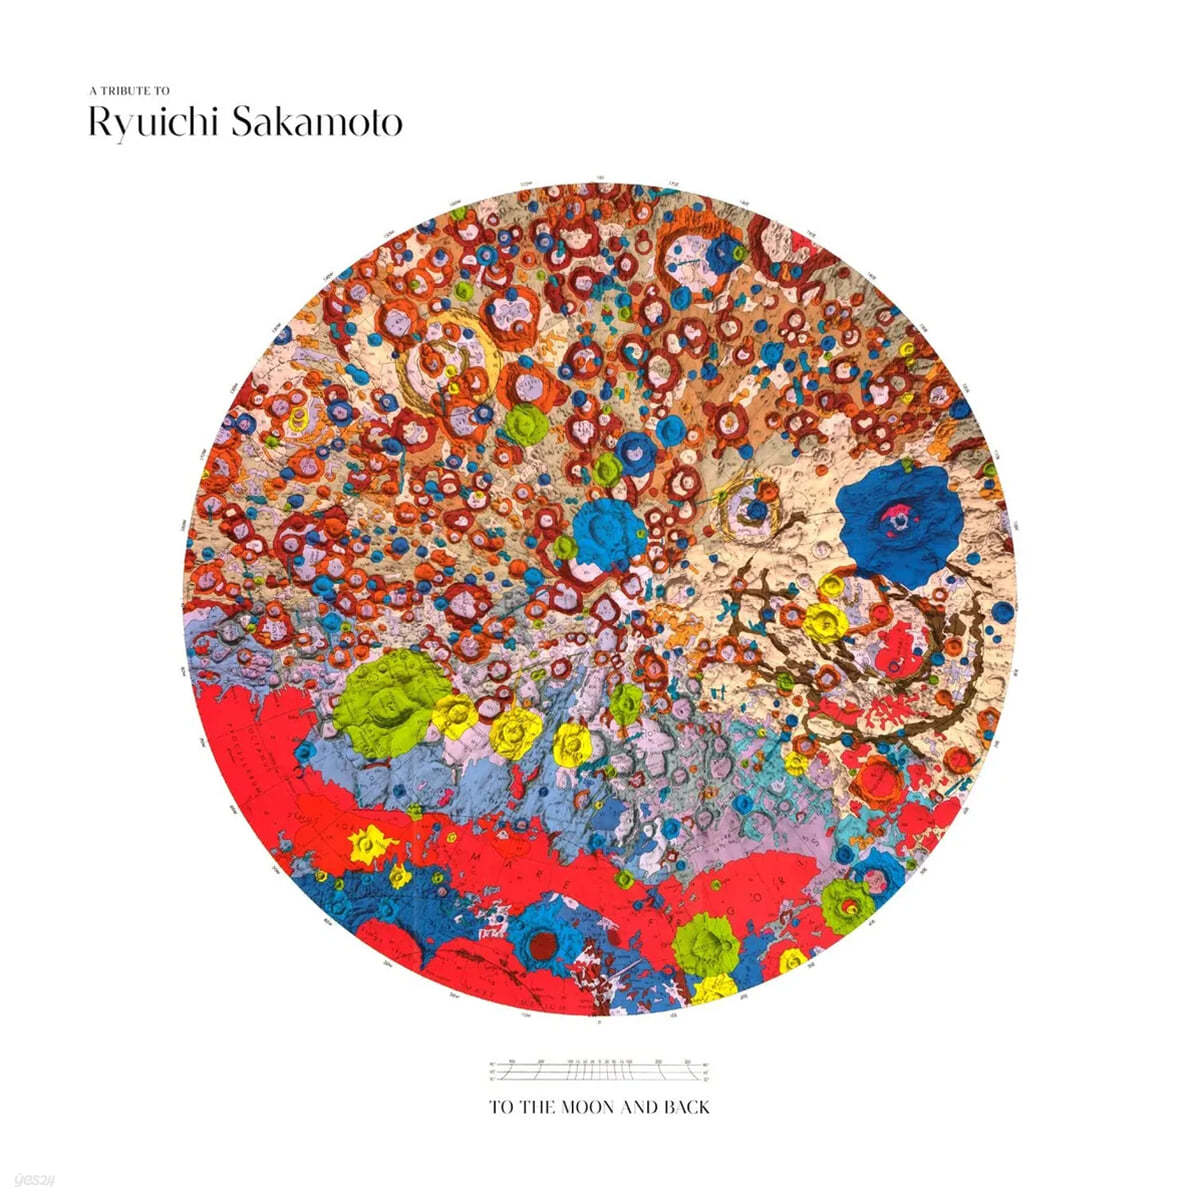 A Tribute to Ryuichi Sakamoto - To the Moon and Back [2LP]